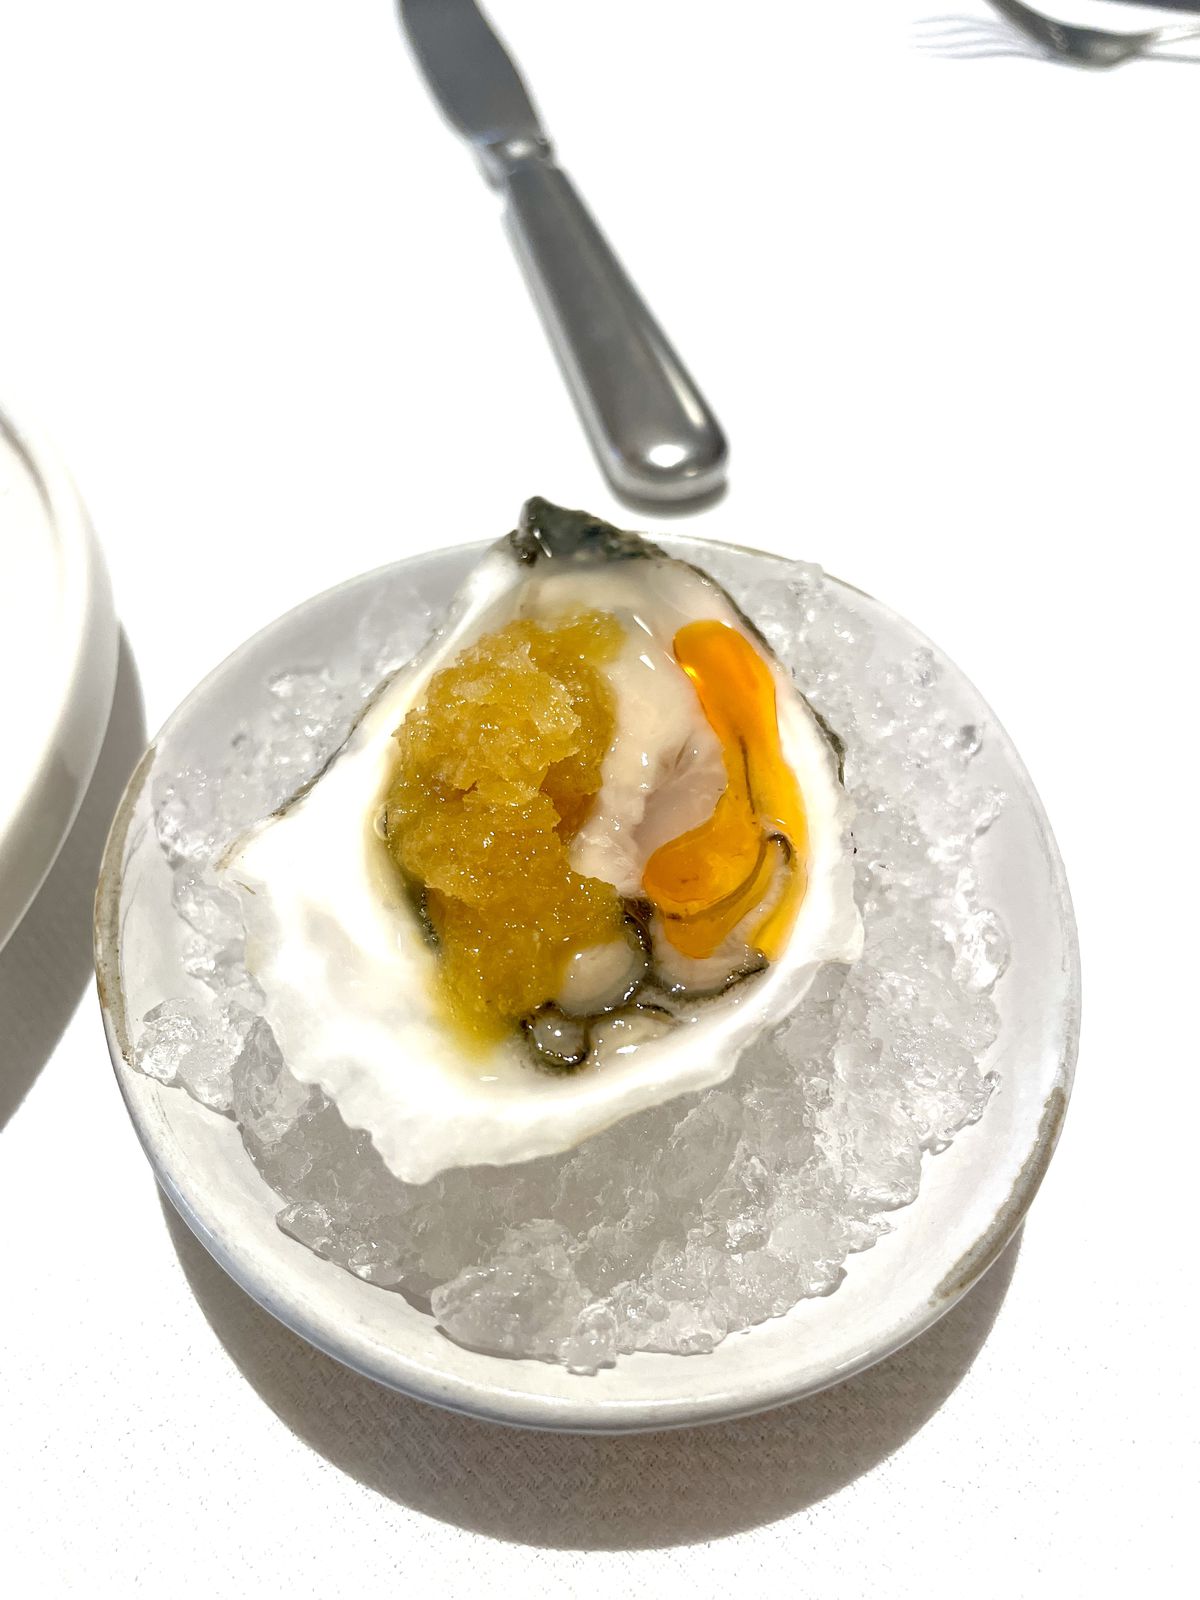 A single oyster sits on a white plate. There is frozen granata in it, along with chile oil.